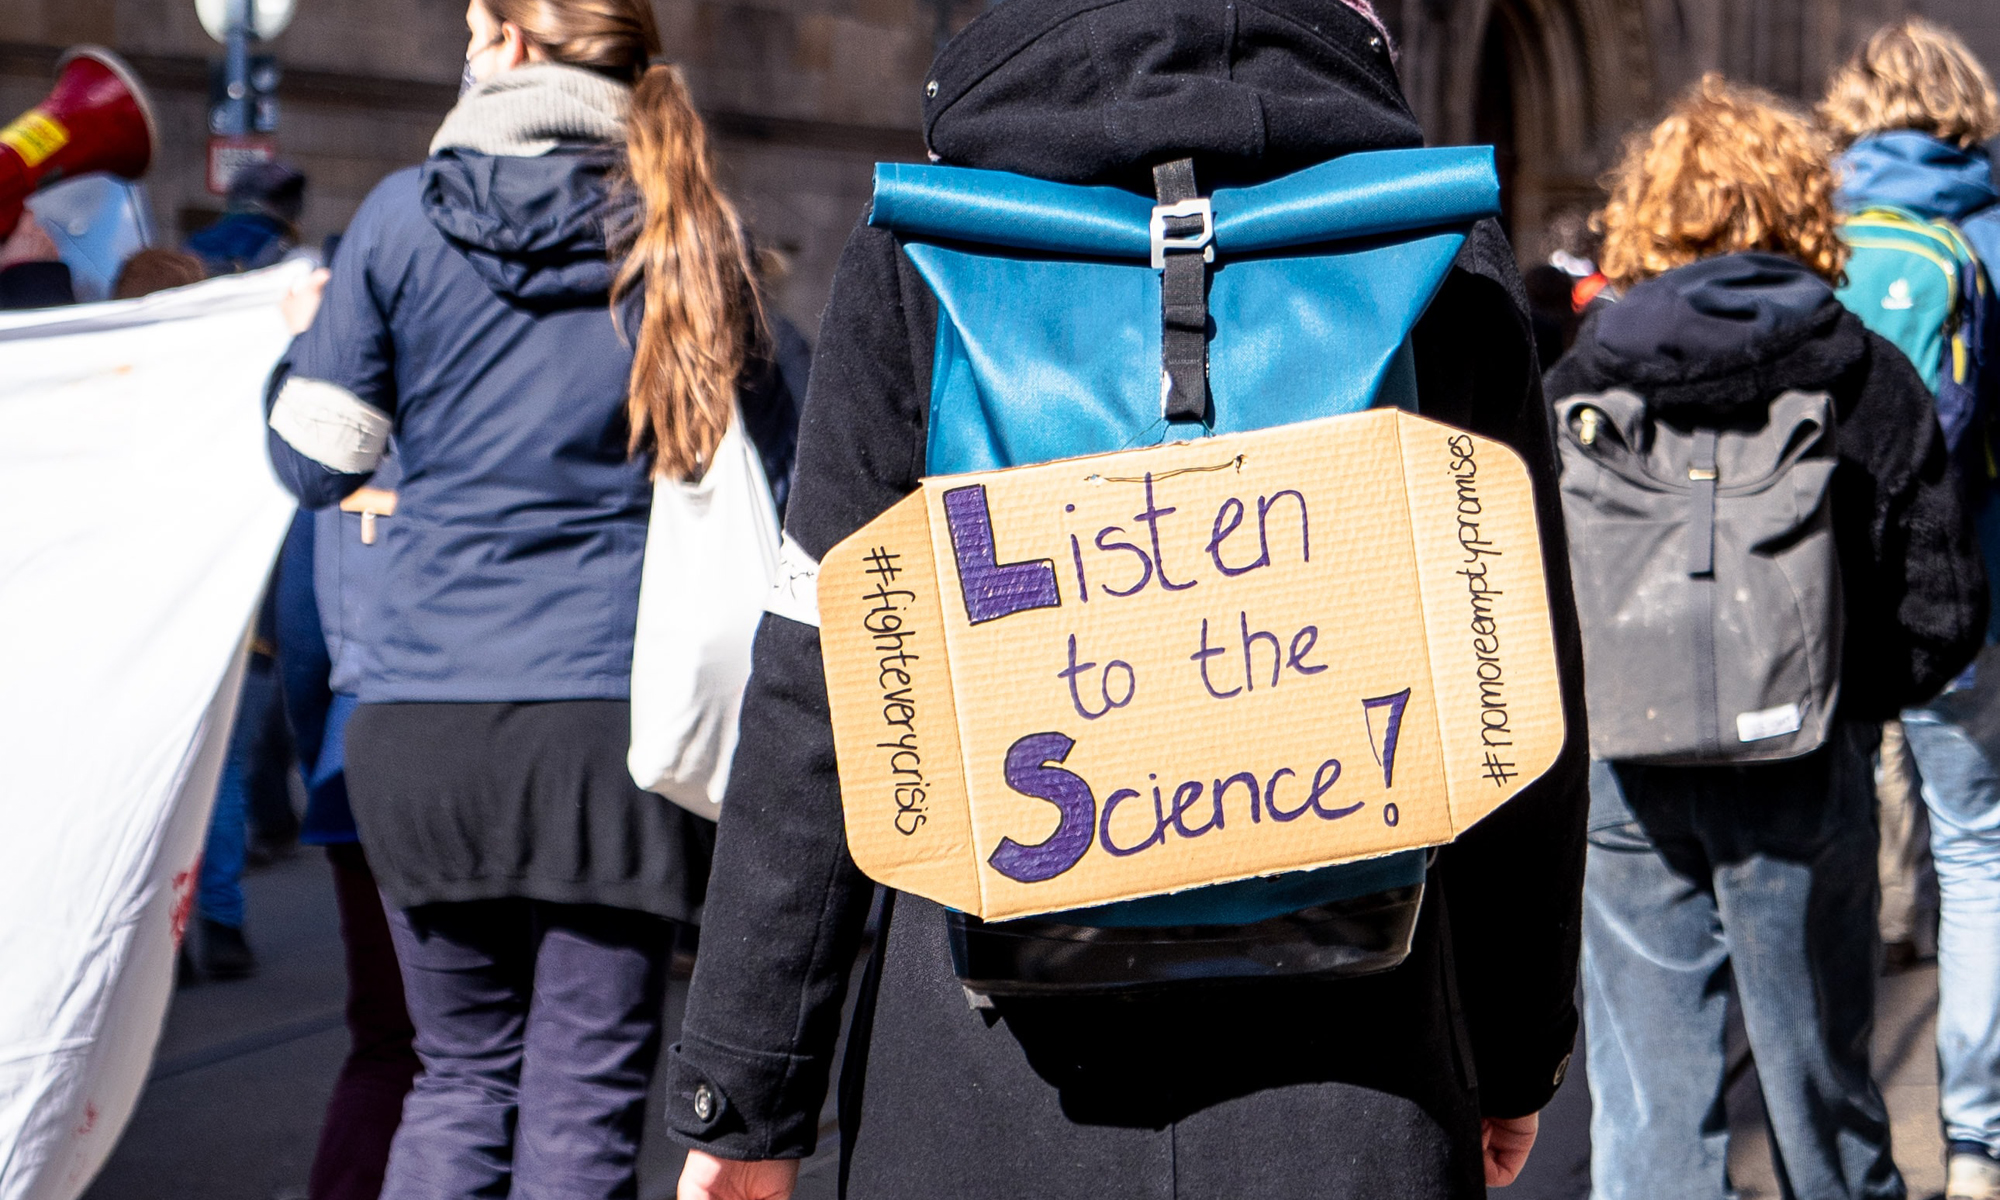 Protest showing people demonstrating. One sign in the centre shows the words "Listen to Science". Photo by Mika Baumeister on Unsplash